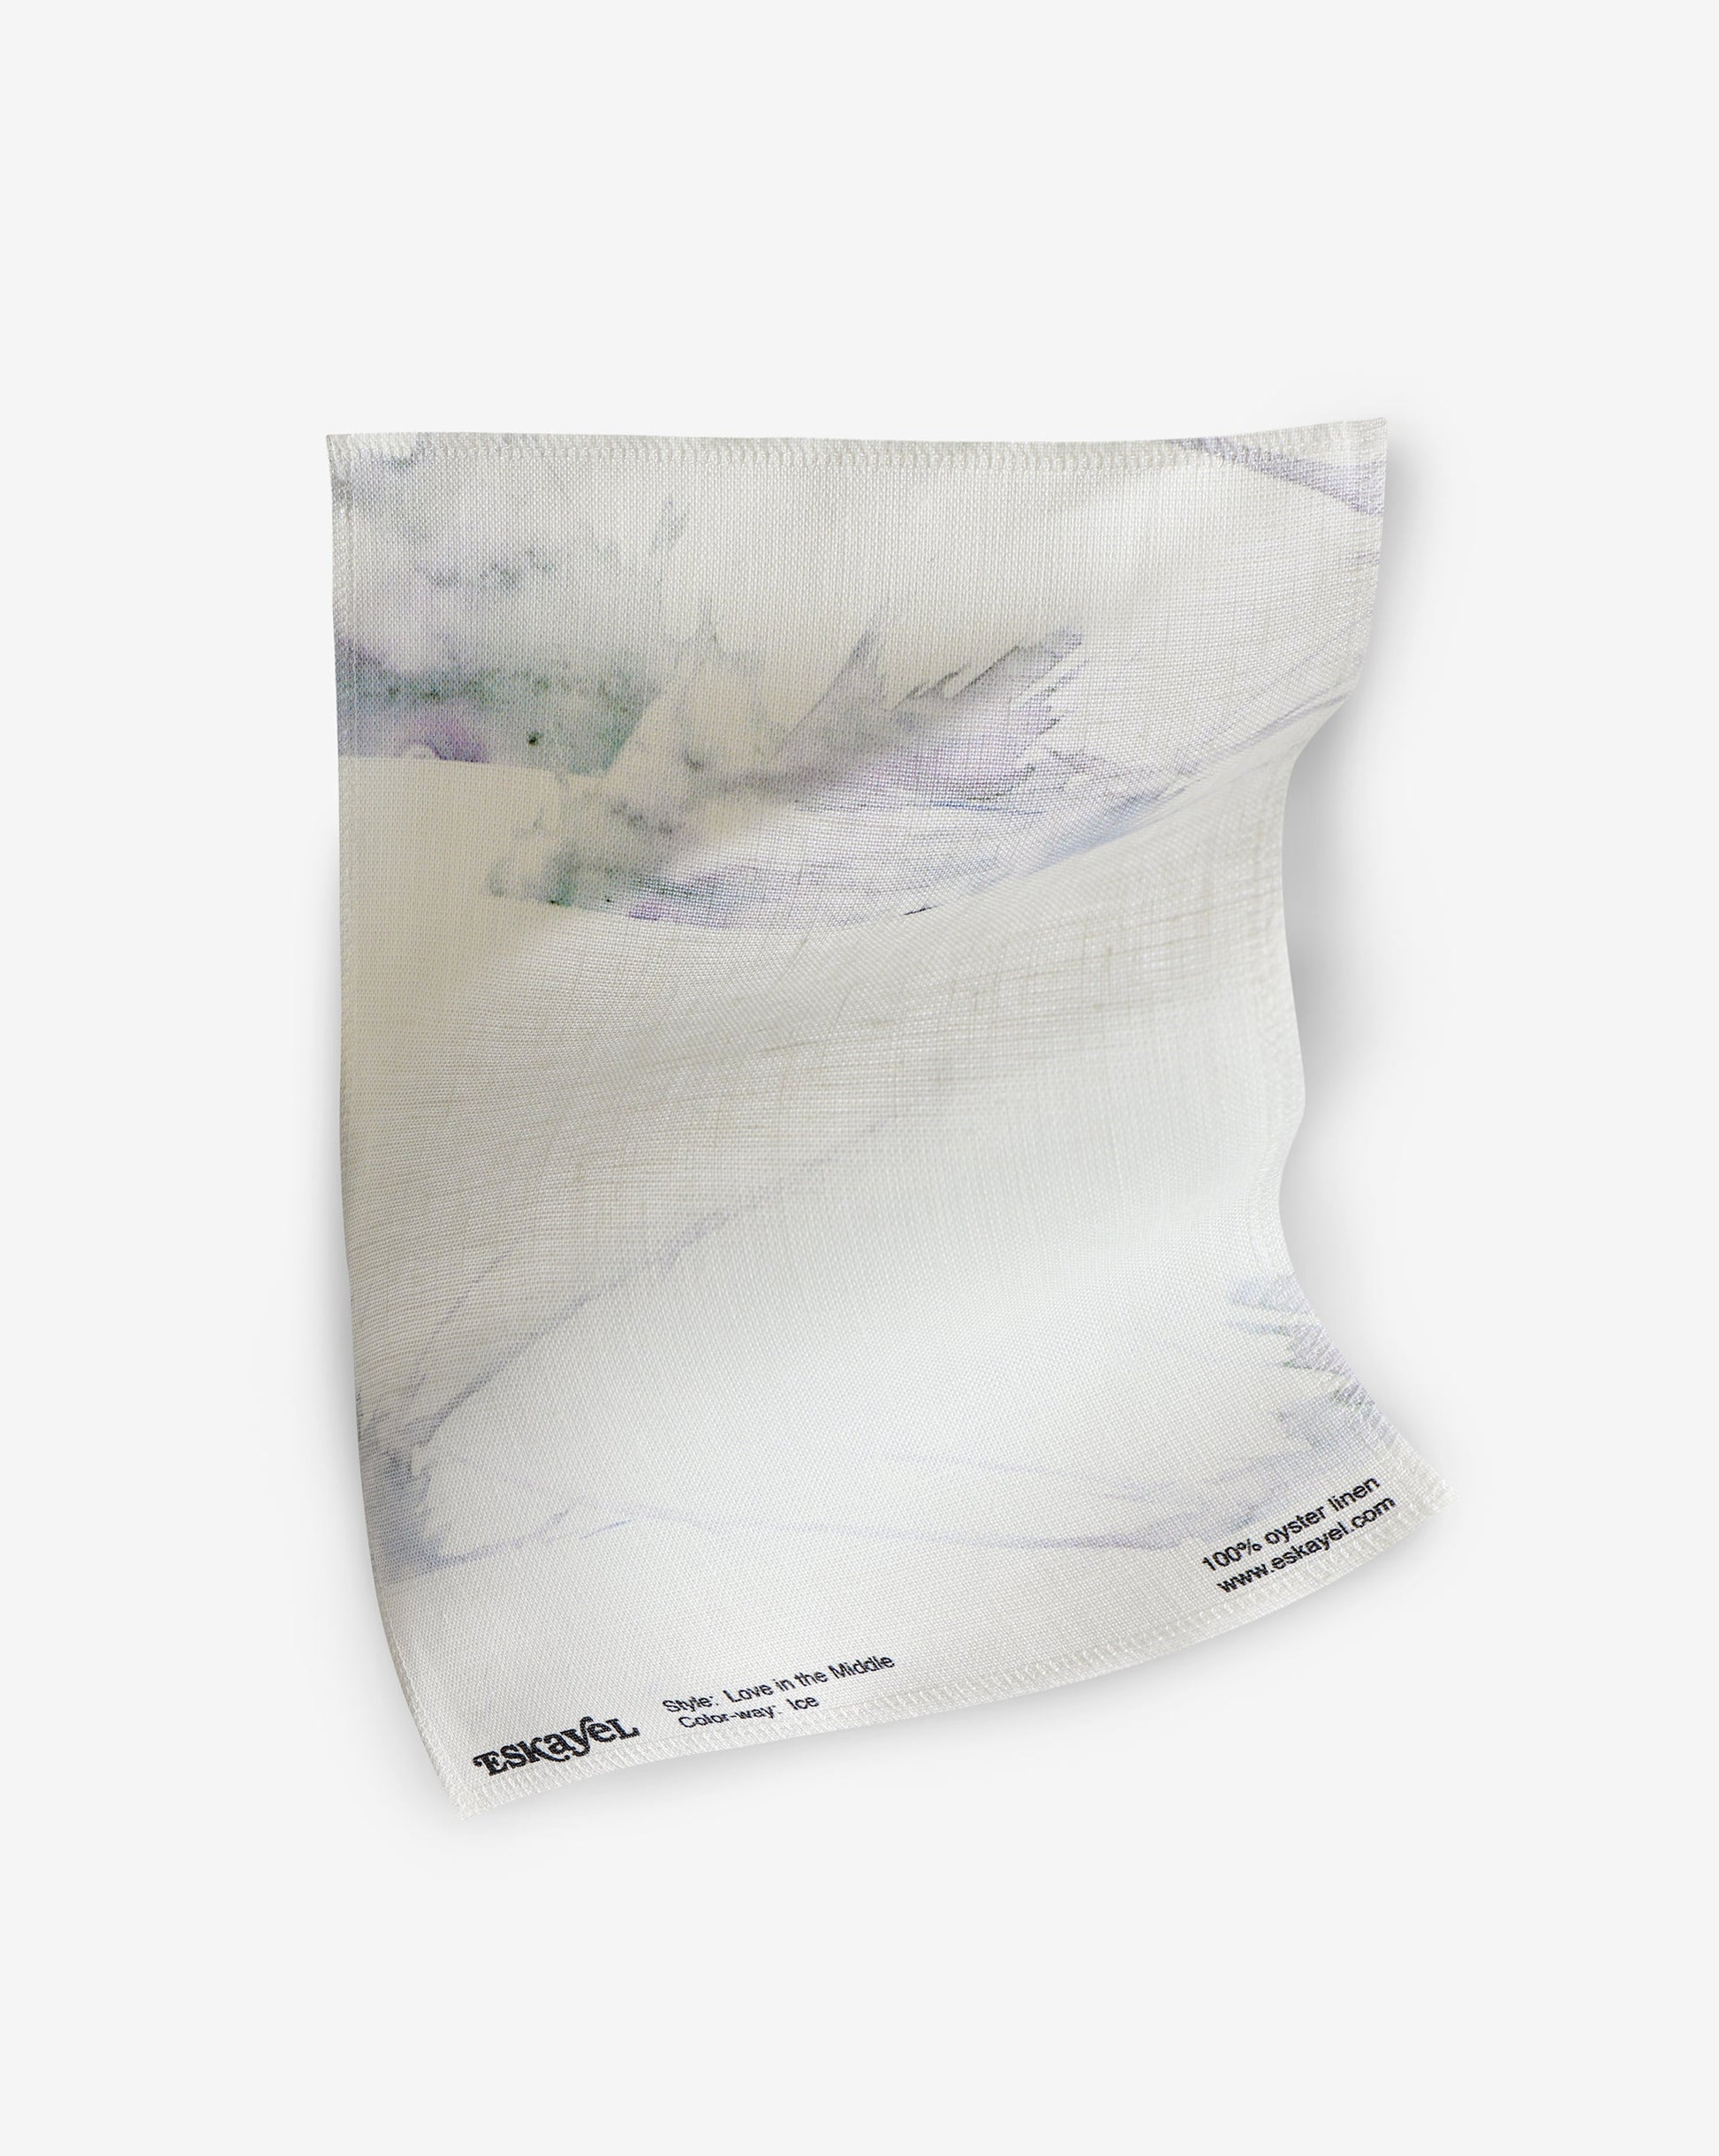 A Love in the Middle Fabric Ice sheet with a purple and white pattern, perfect for showcasing watercolor artwork